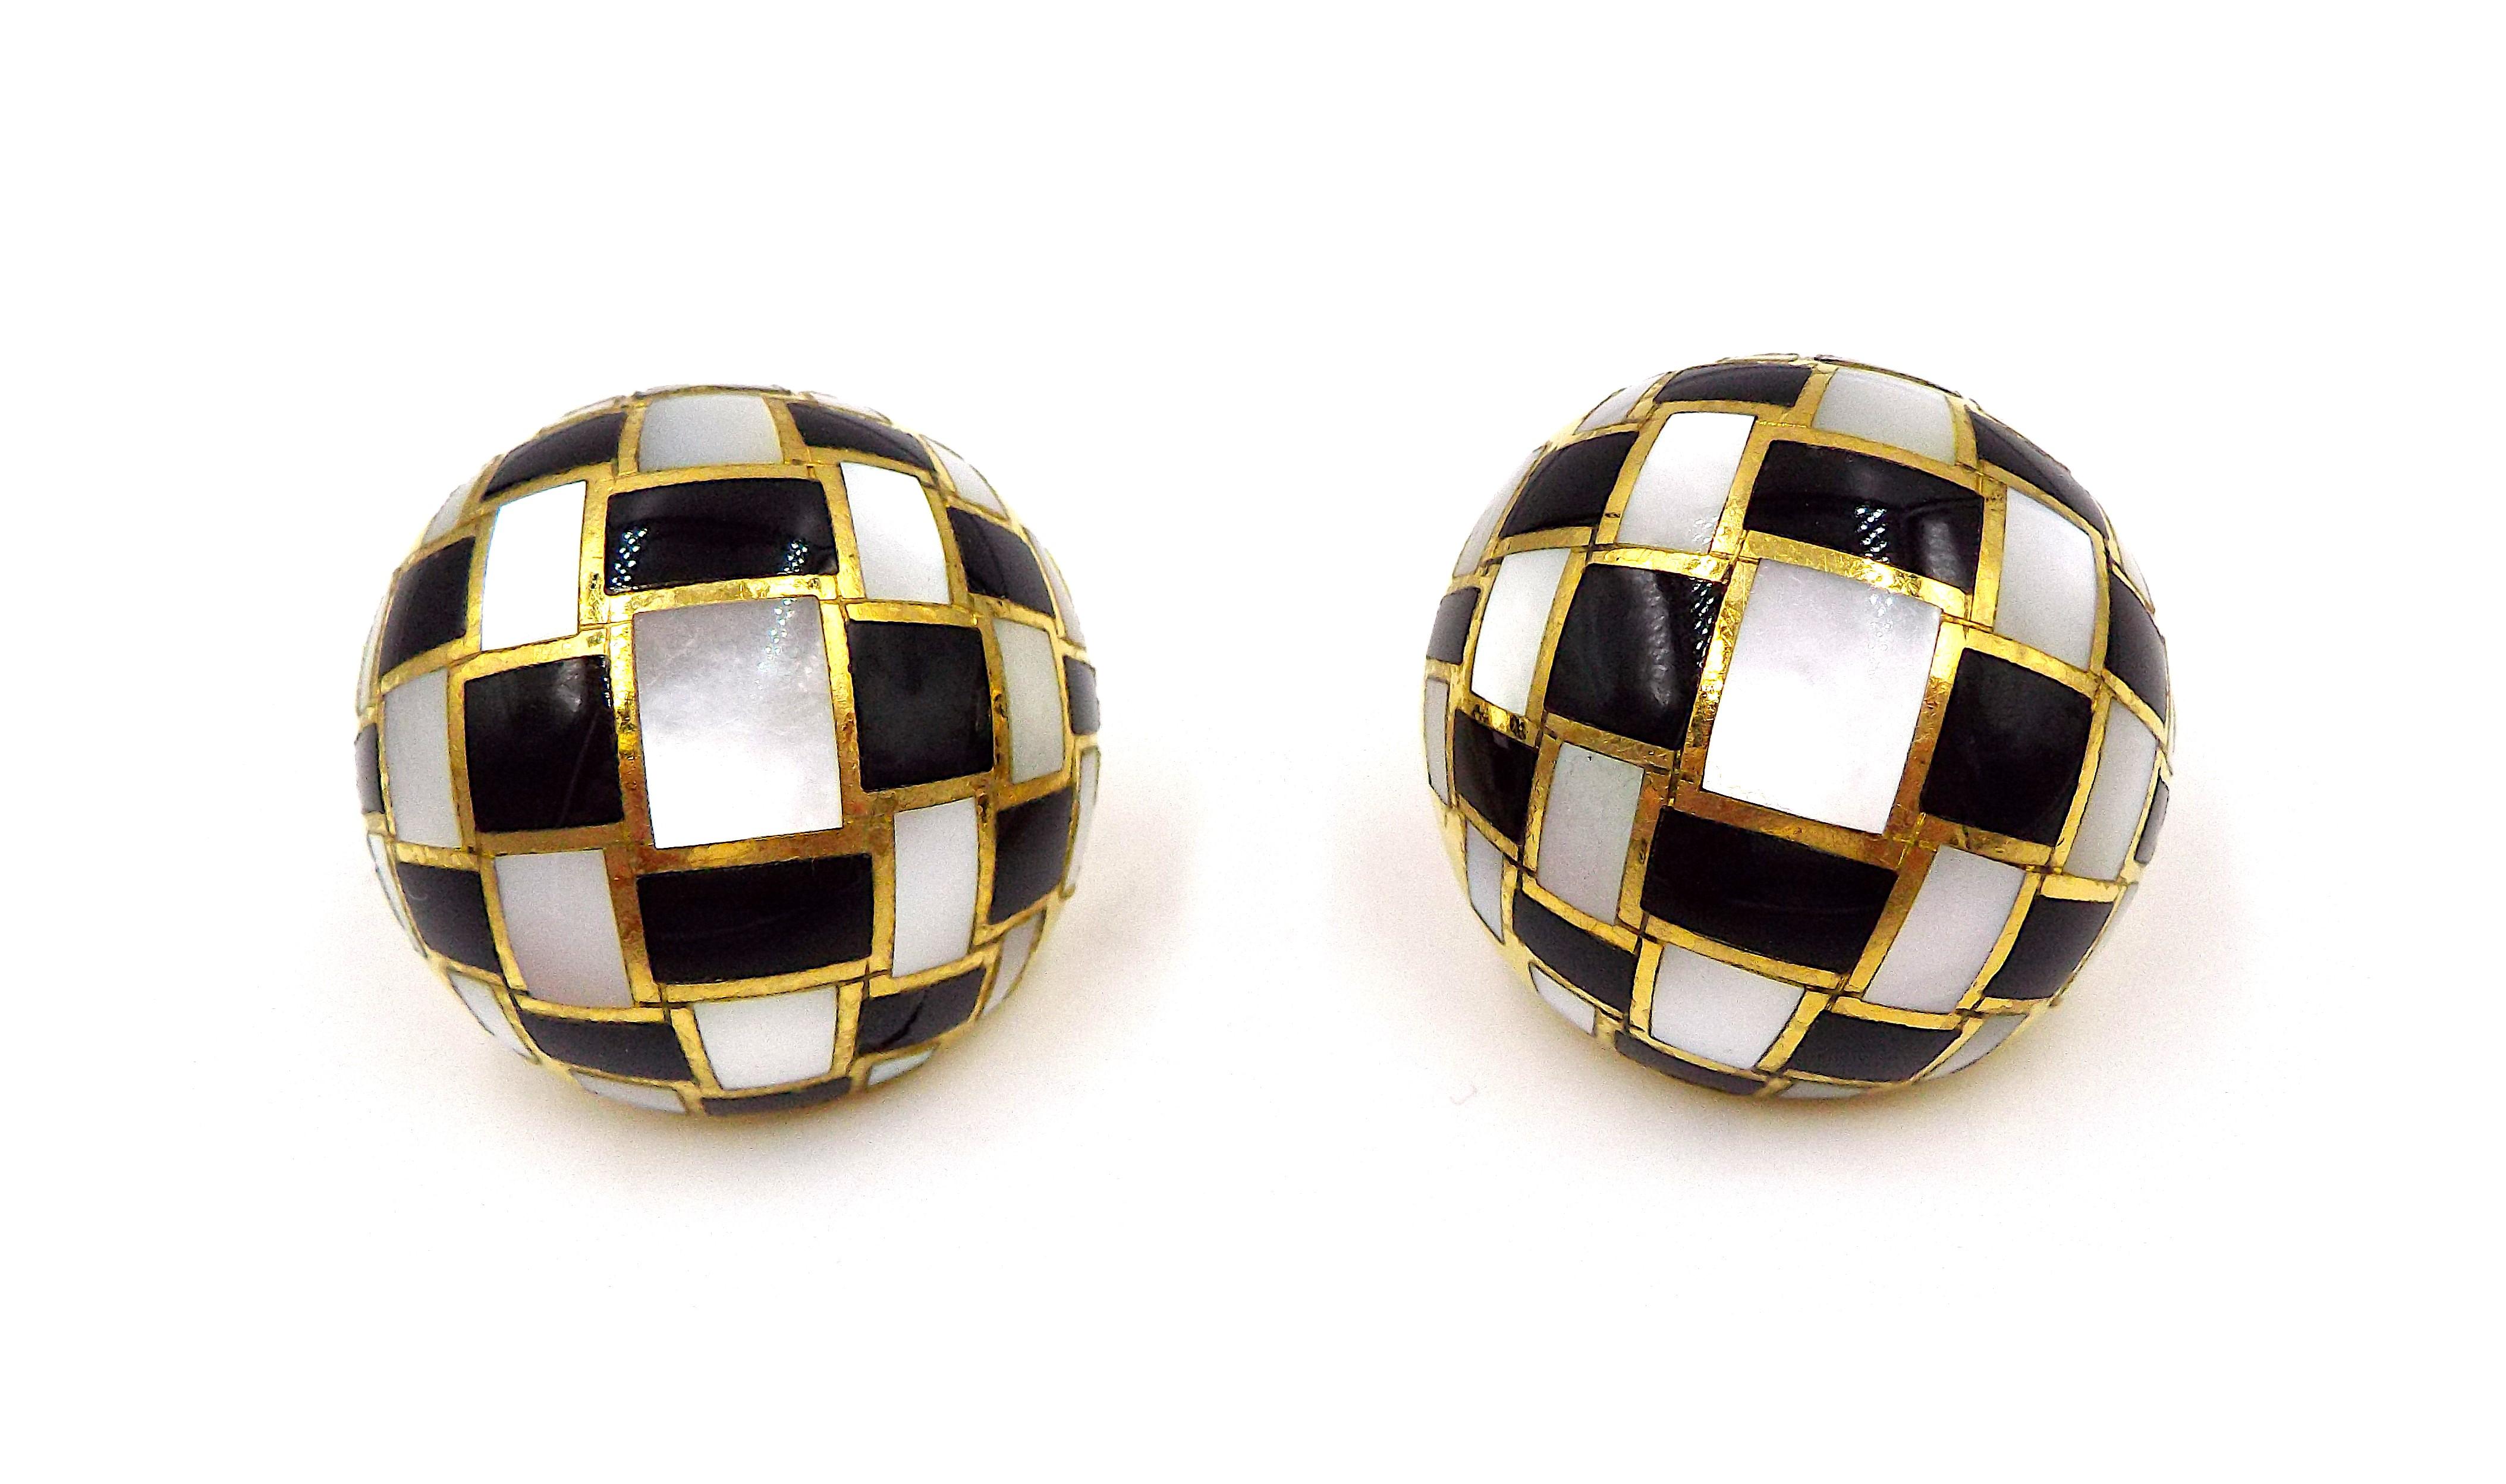 A pair of stylish dome-shaped earrings by Tiffany. 18K yellow gold, onyx and mother-of-pearl chessboard pattern, signed Tiffany, stamped 750. Each earring weighs 11.4 grams, diameter is 1 inch. The earrings are designed for pierced ears.